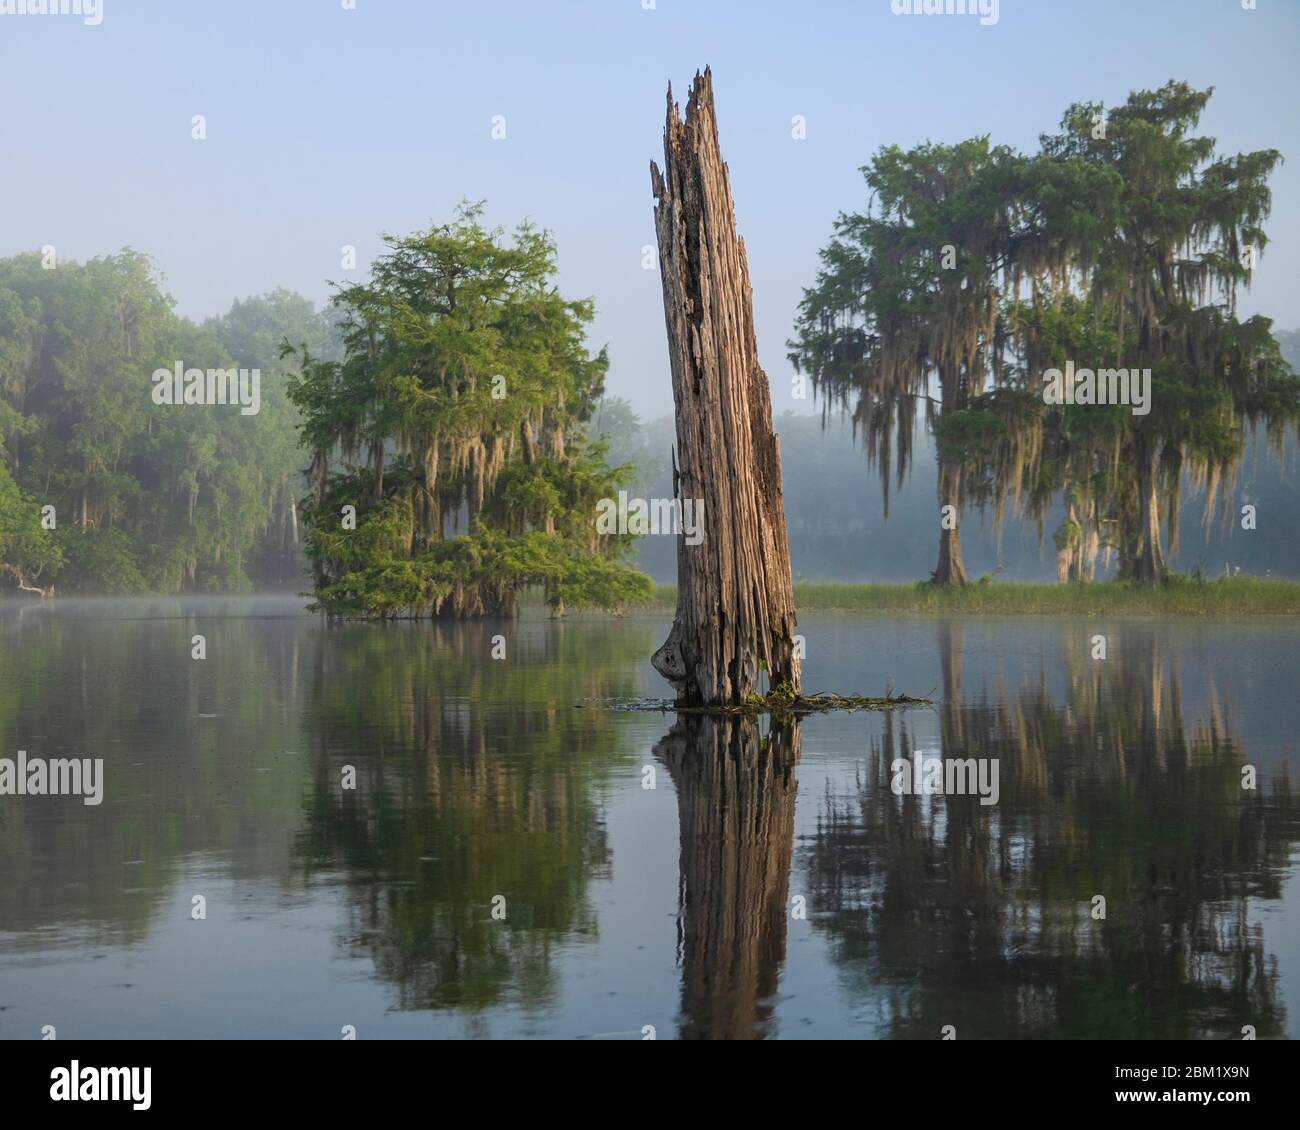 Remains of a cypress tree in the scenic spring fed Rainbow River. Dunnellon, Florida. Cypress trees draped in Spanish Moss set the background. Stock Photo